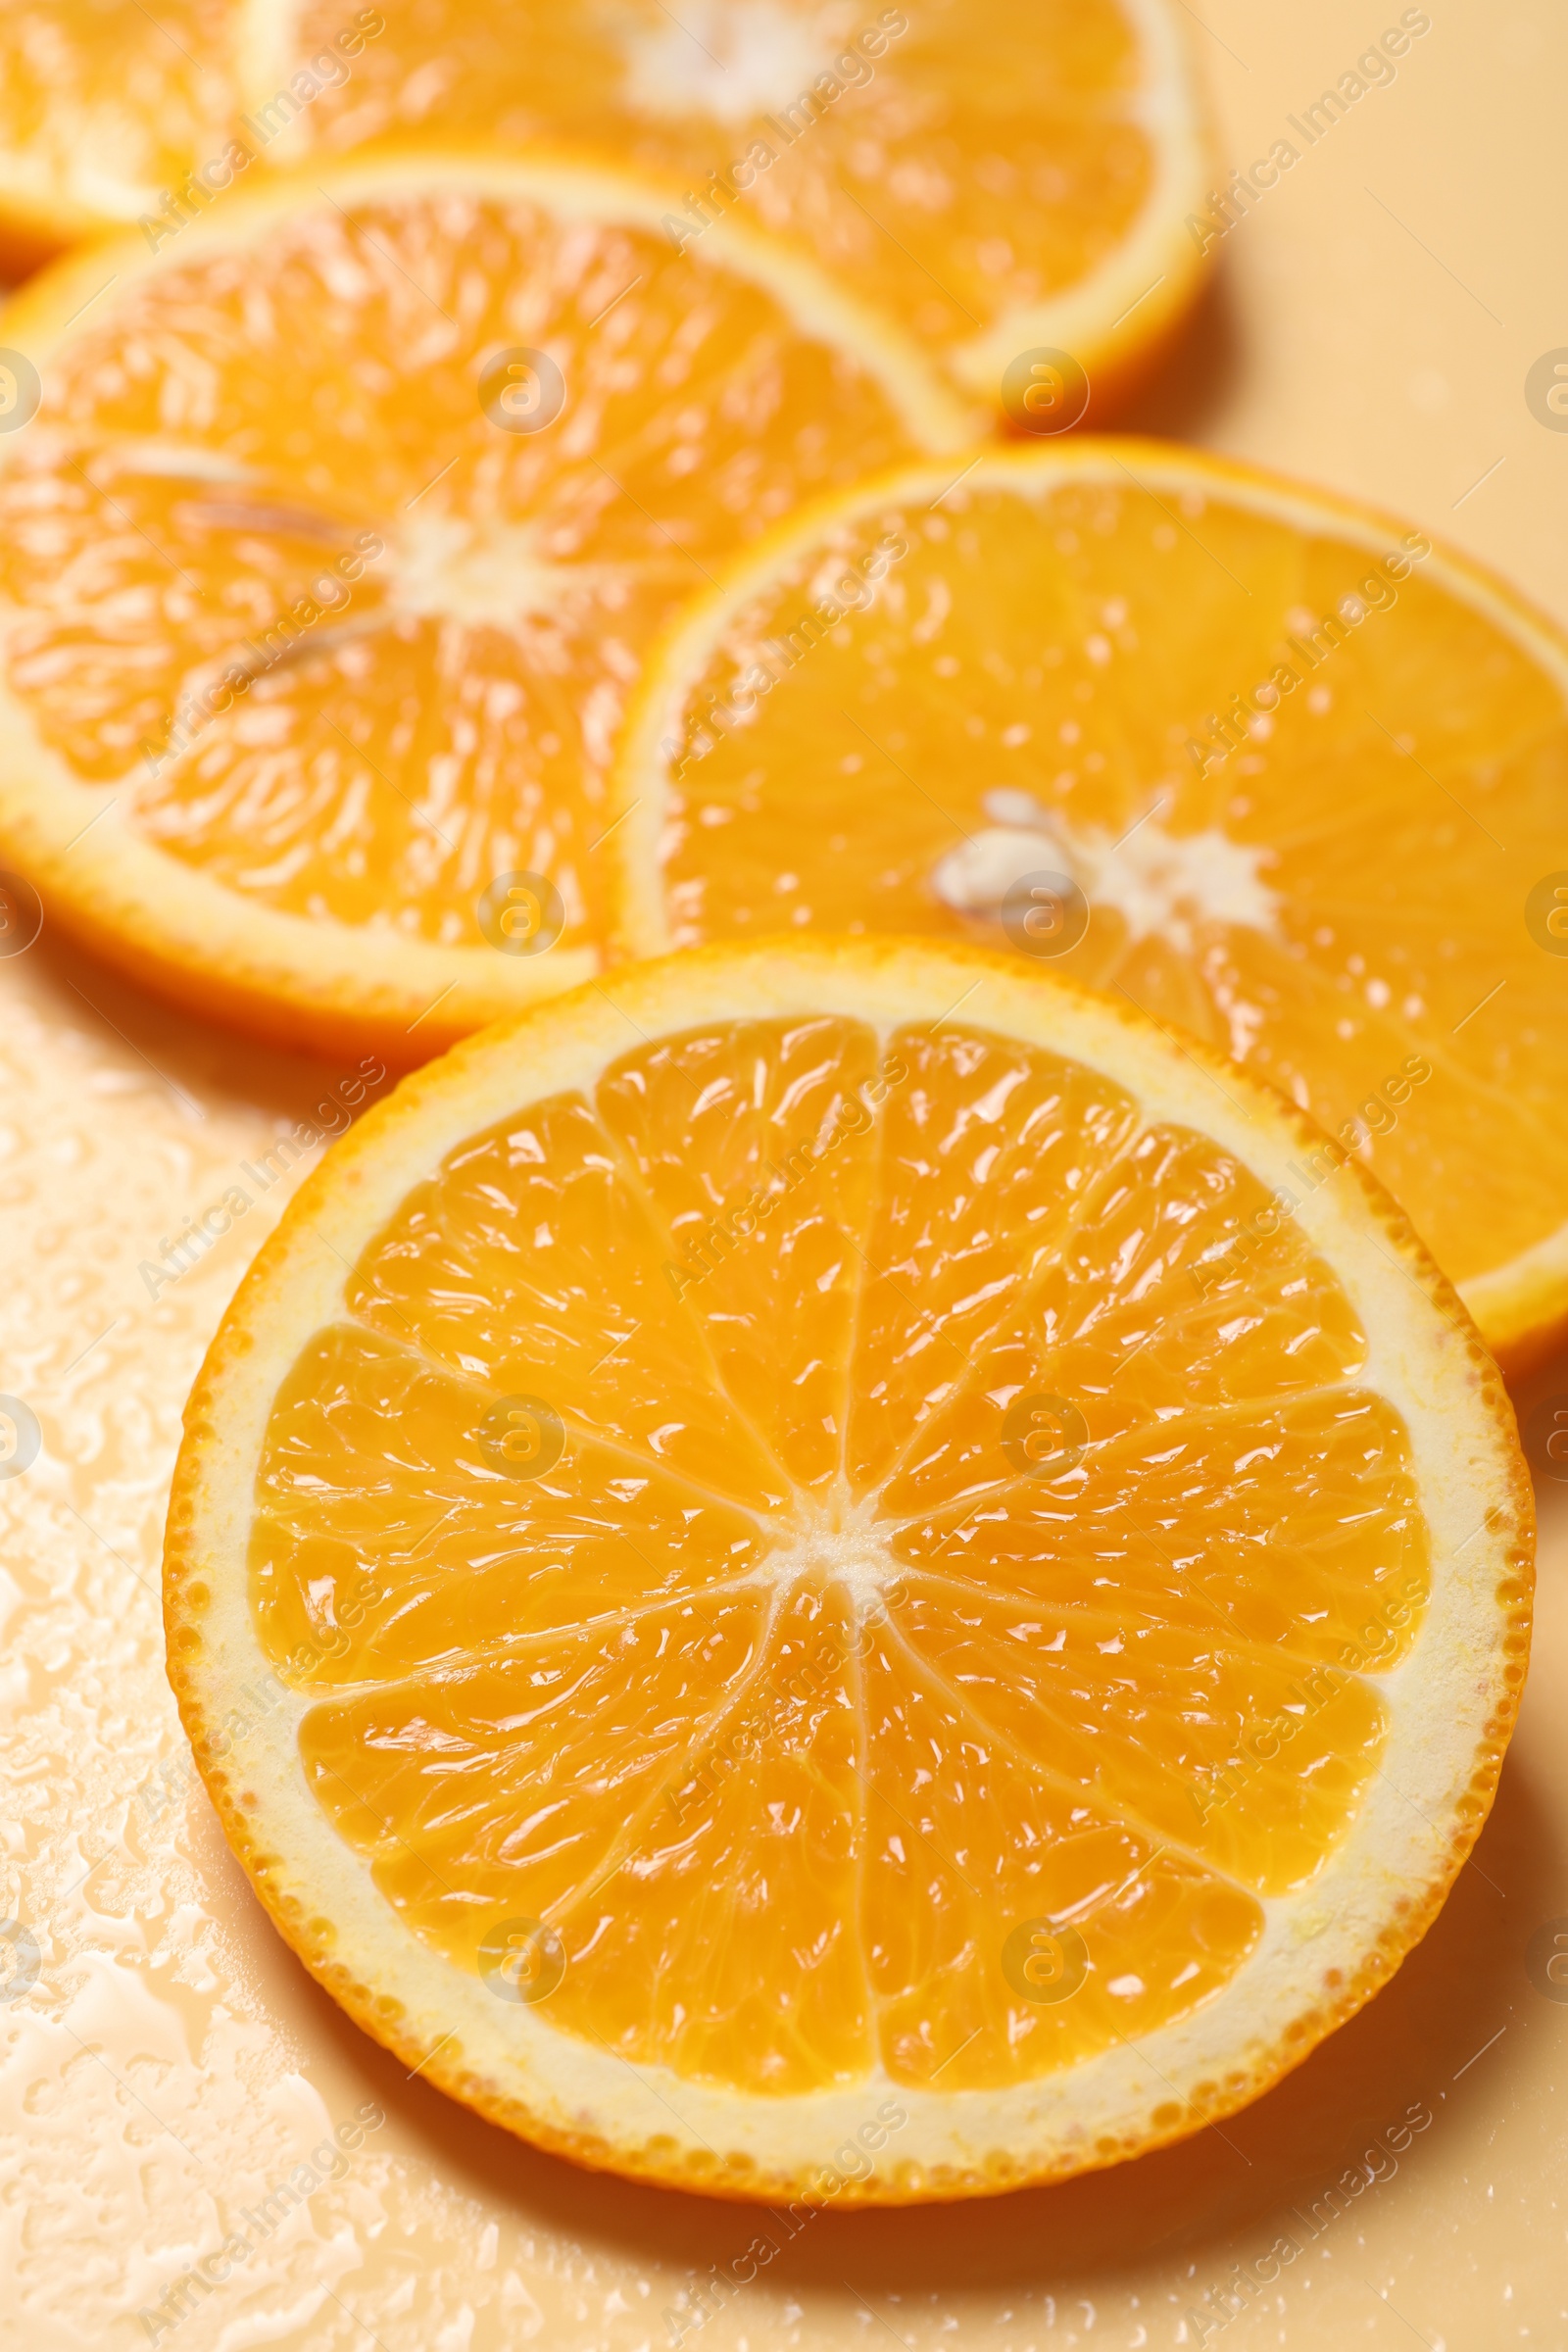 Photo of Slices of juicy orange and water on beige background, closeup